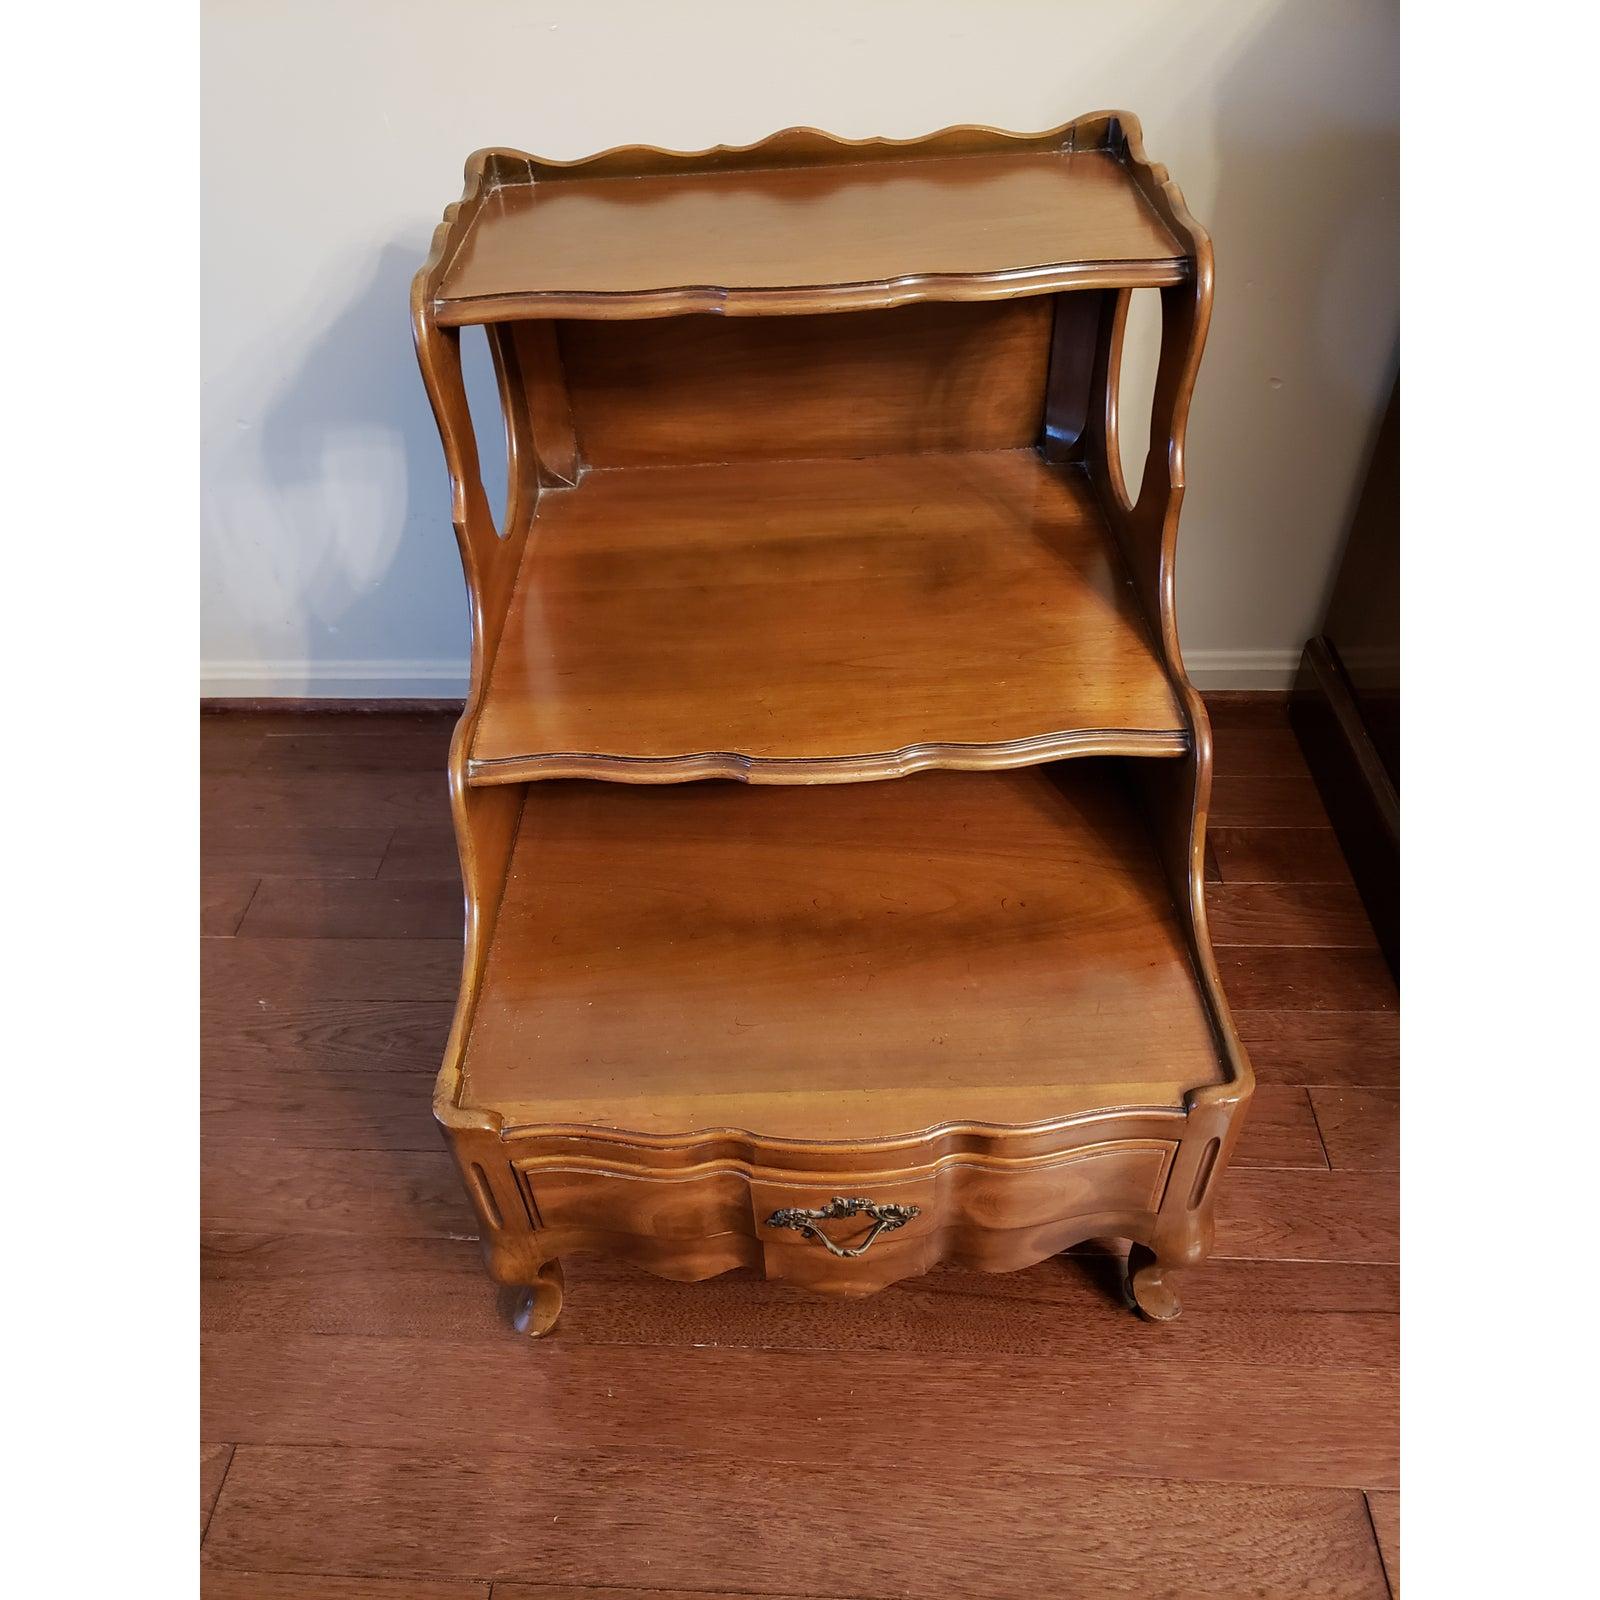 Rare find. John Widdicomb three tier walnut end Table with a bottom drawer. Made in the 1940s.